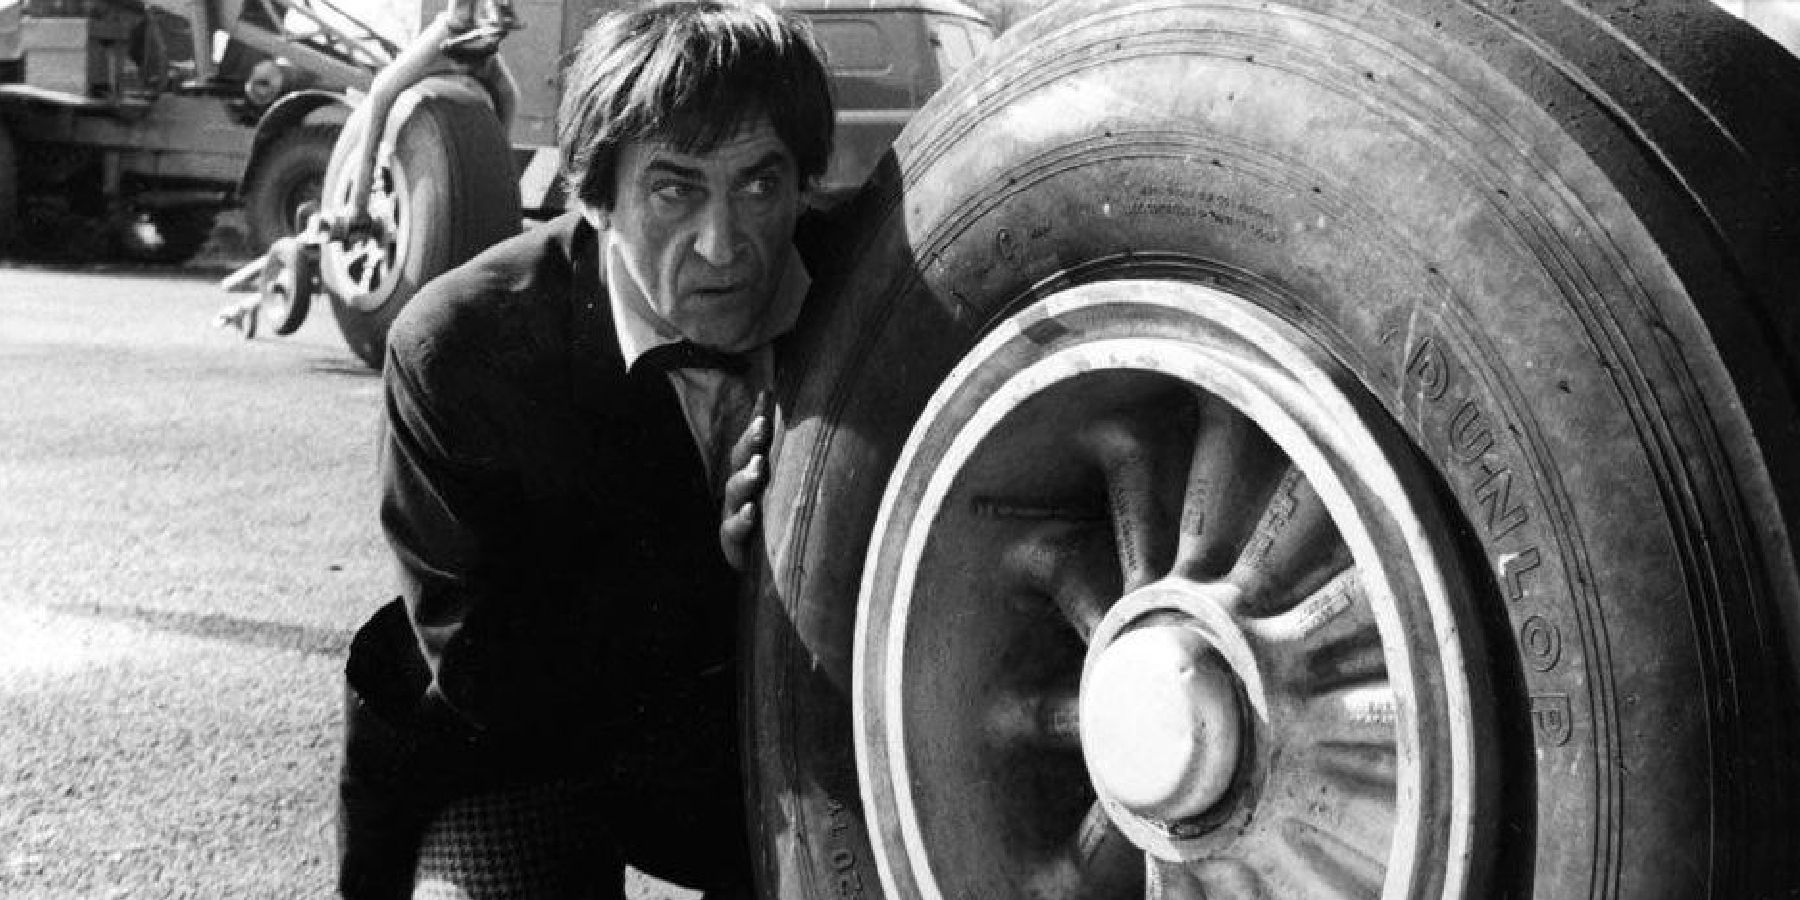 The Second Doctor investigates Gatwick airport